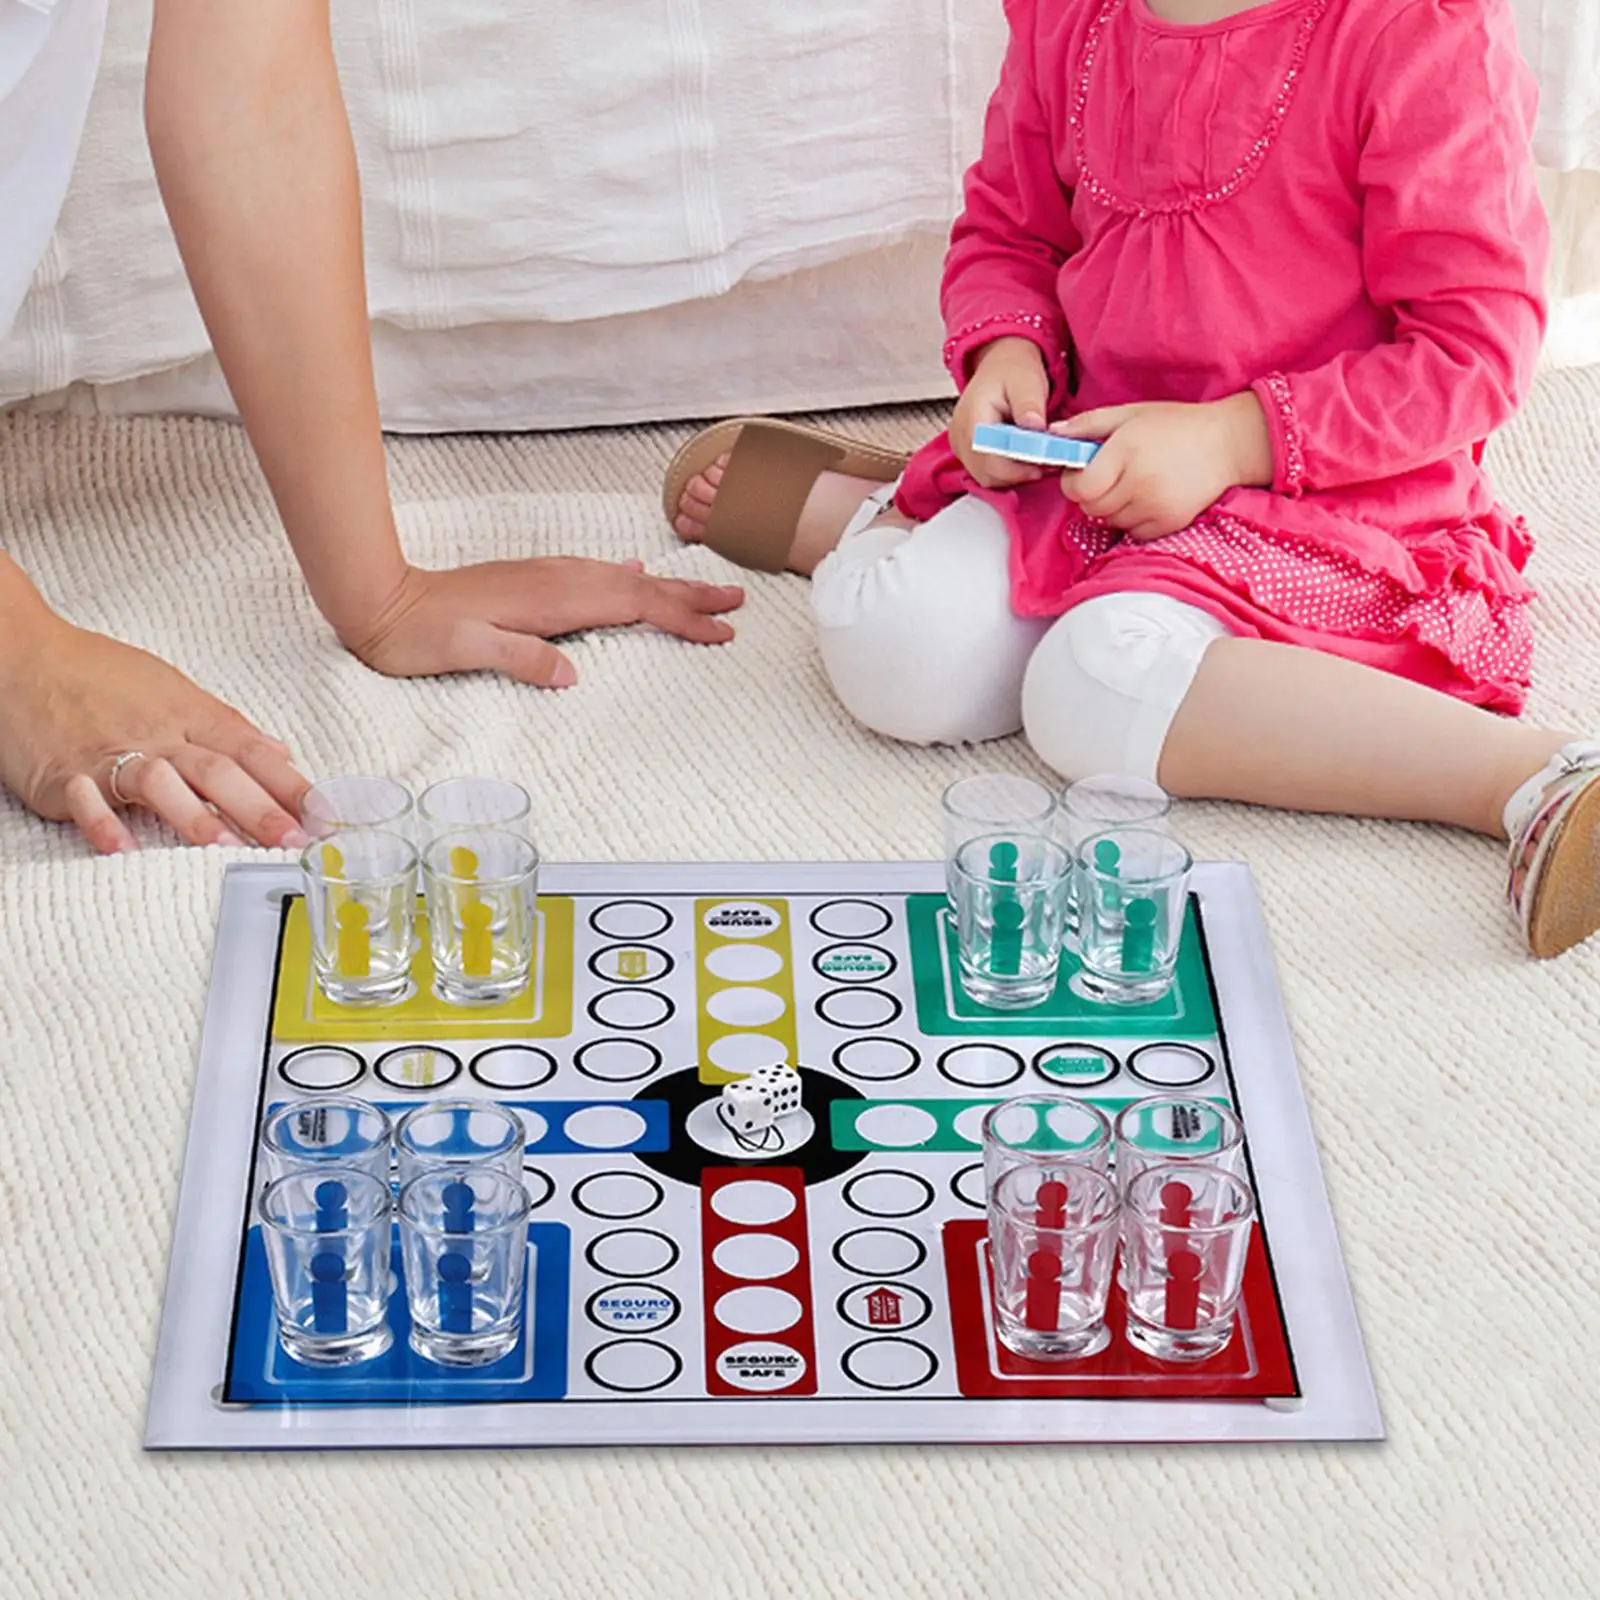 Flying Chess Games Novelty Family Party Game Family Cups Games Chess Board Games Table Games for Easter Wedding Cafe Hotel Home